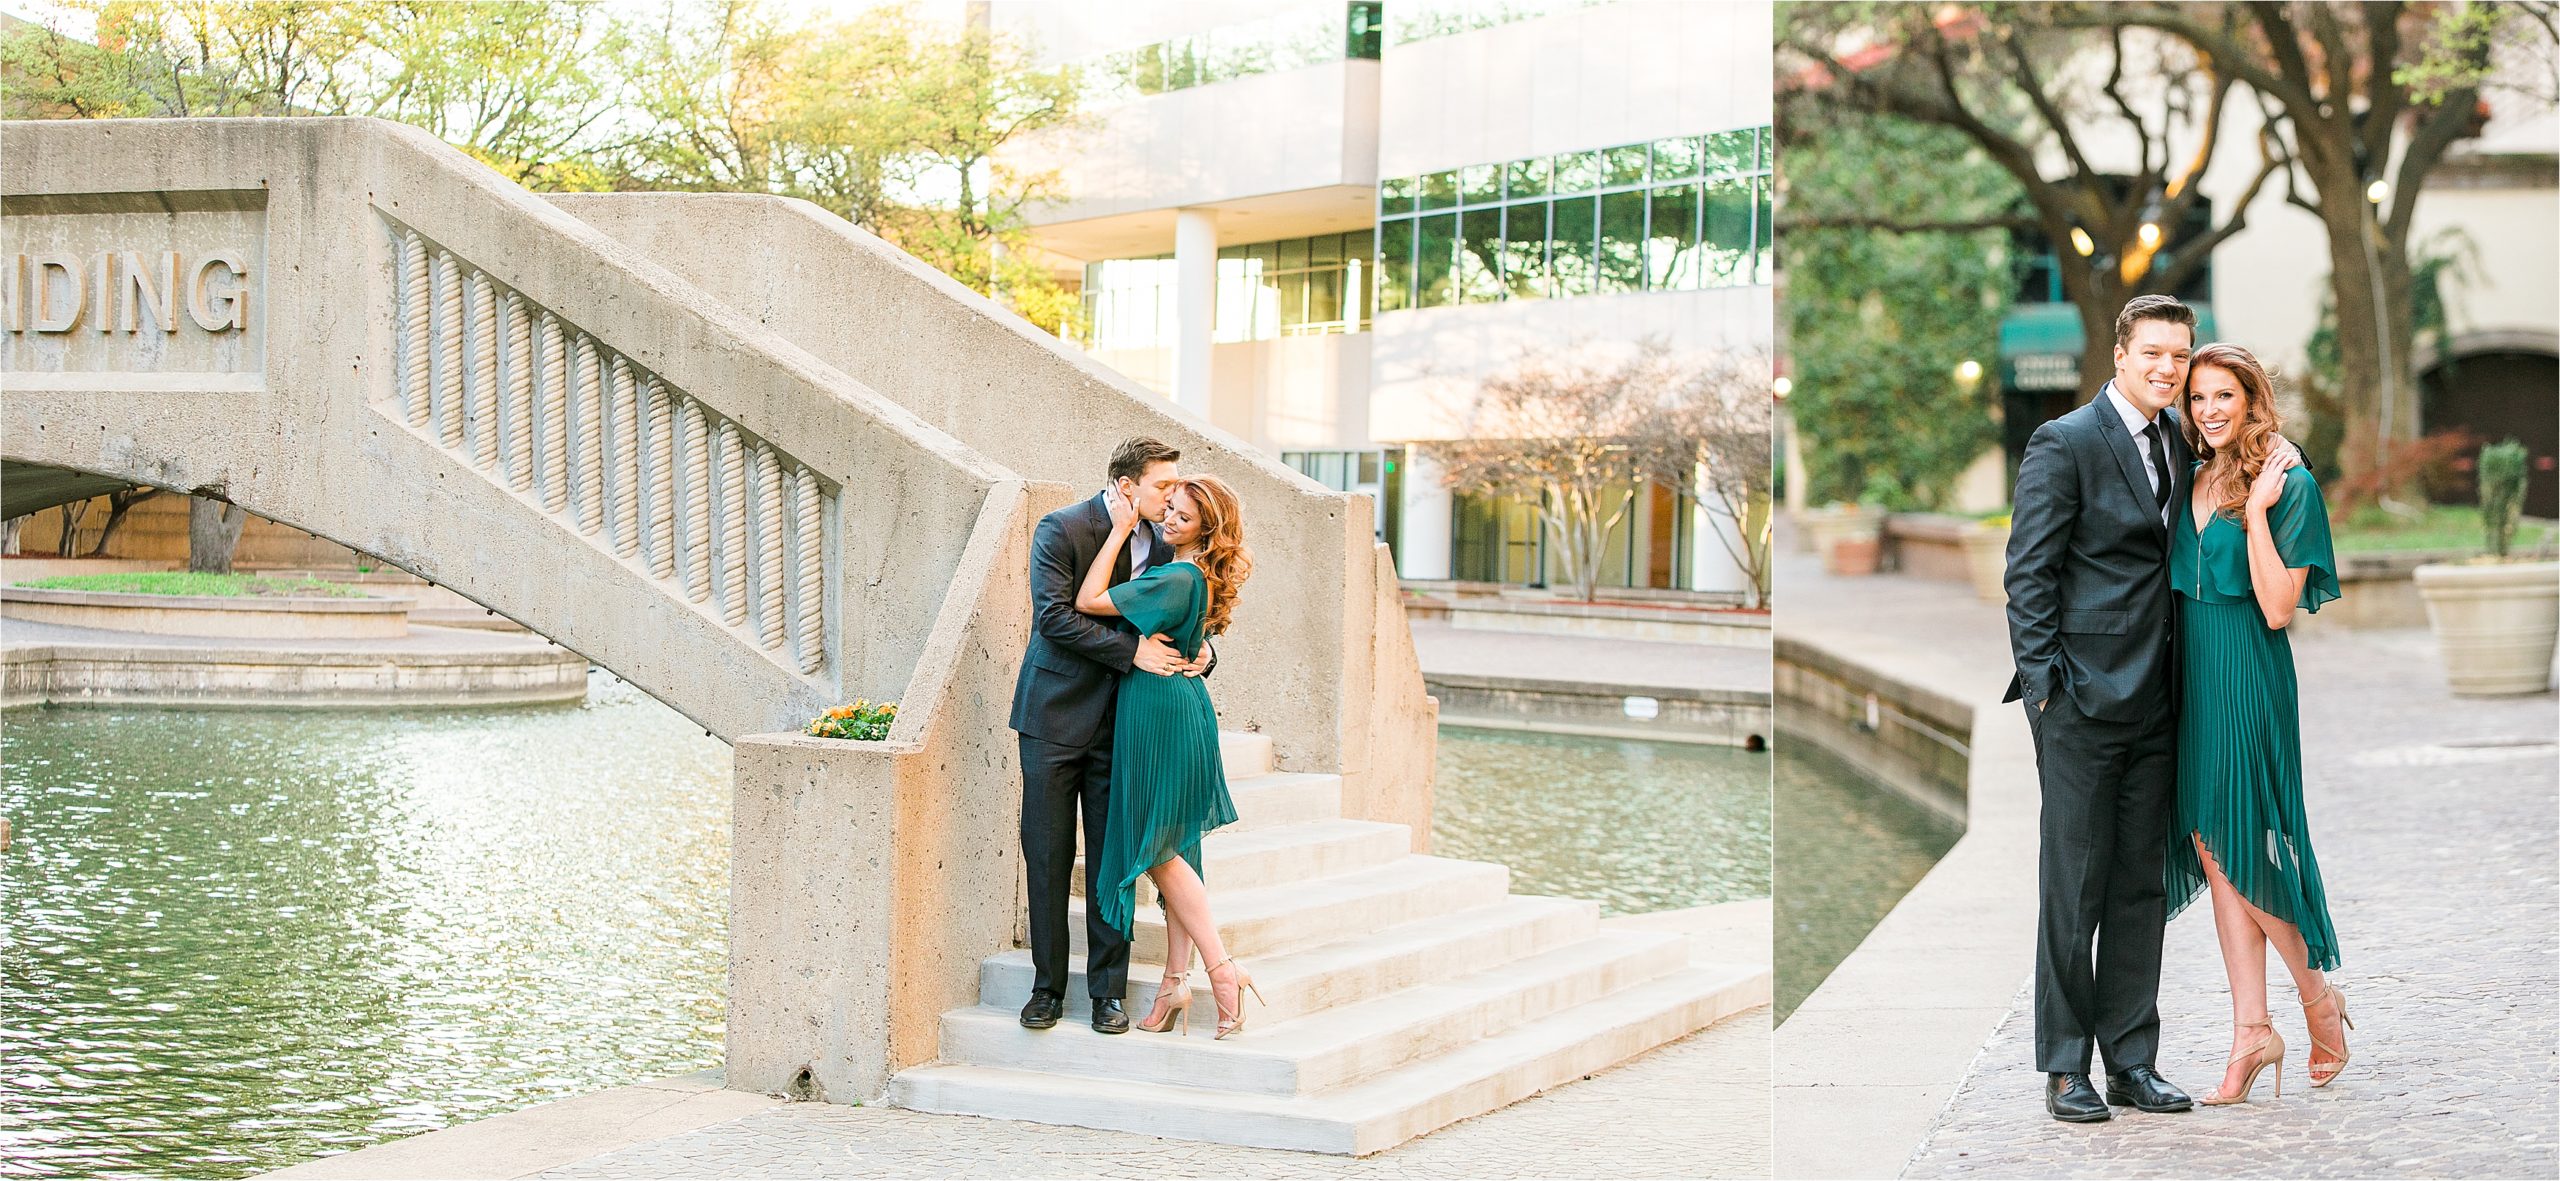 Kisses on the cheek in front of a bridge and big smiles for this engaged couple dressed in an emerald dress and grey suit for their riverwalk inspired engagement session with San Antonio Wedding Photographer Jilian Hogan Photography 